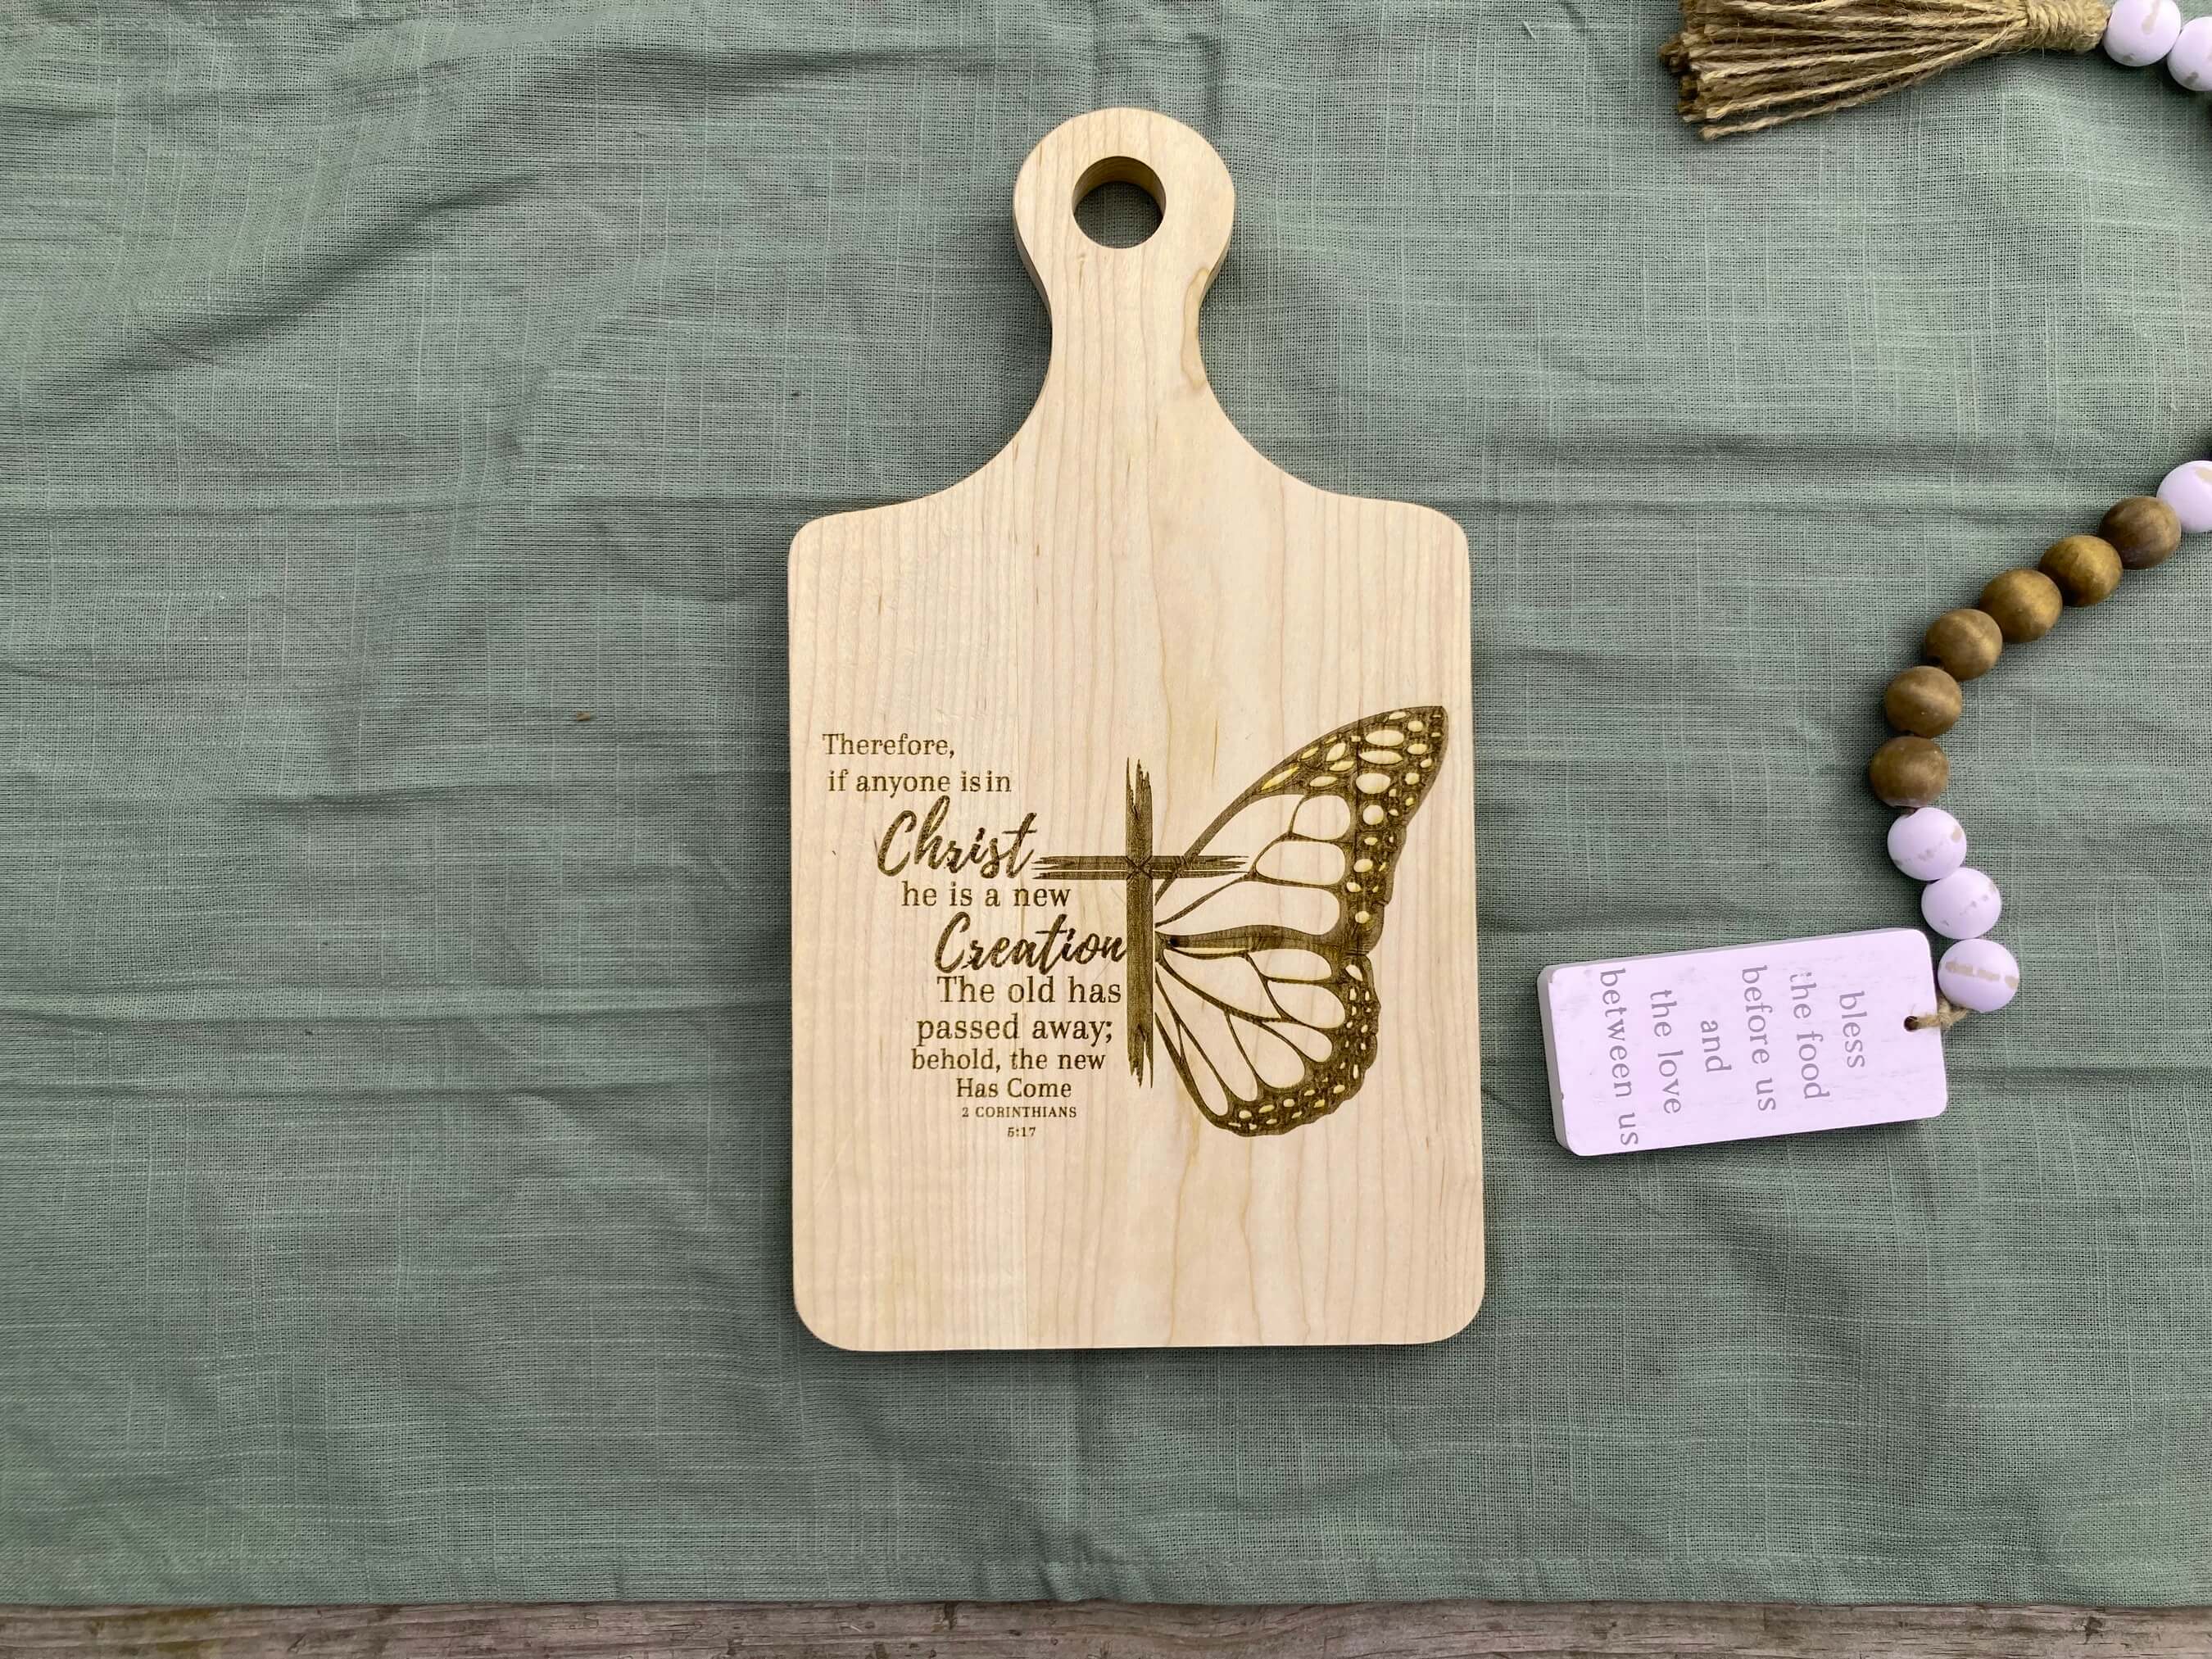 Jesus Cutting board Gift Idea. Here the cutting board is shown on a green background with some decoration on it. The cutting board says 2Cor. 5:17 Therefore, if anyone is iin Christ, he is ja new creation.2 kThe old has passed away; behold, the new has come.. sawyercustomcrafts.com